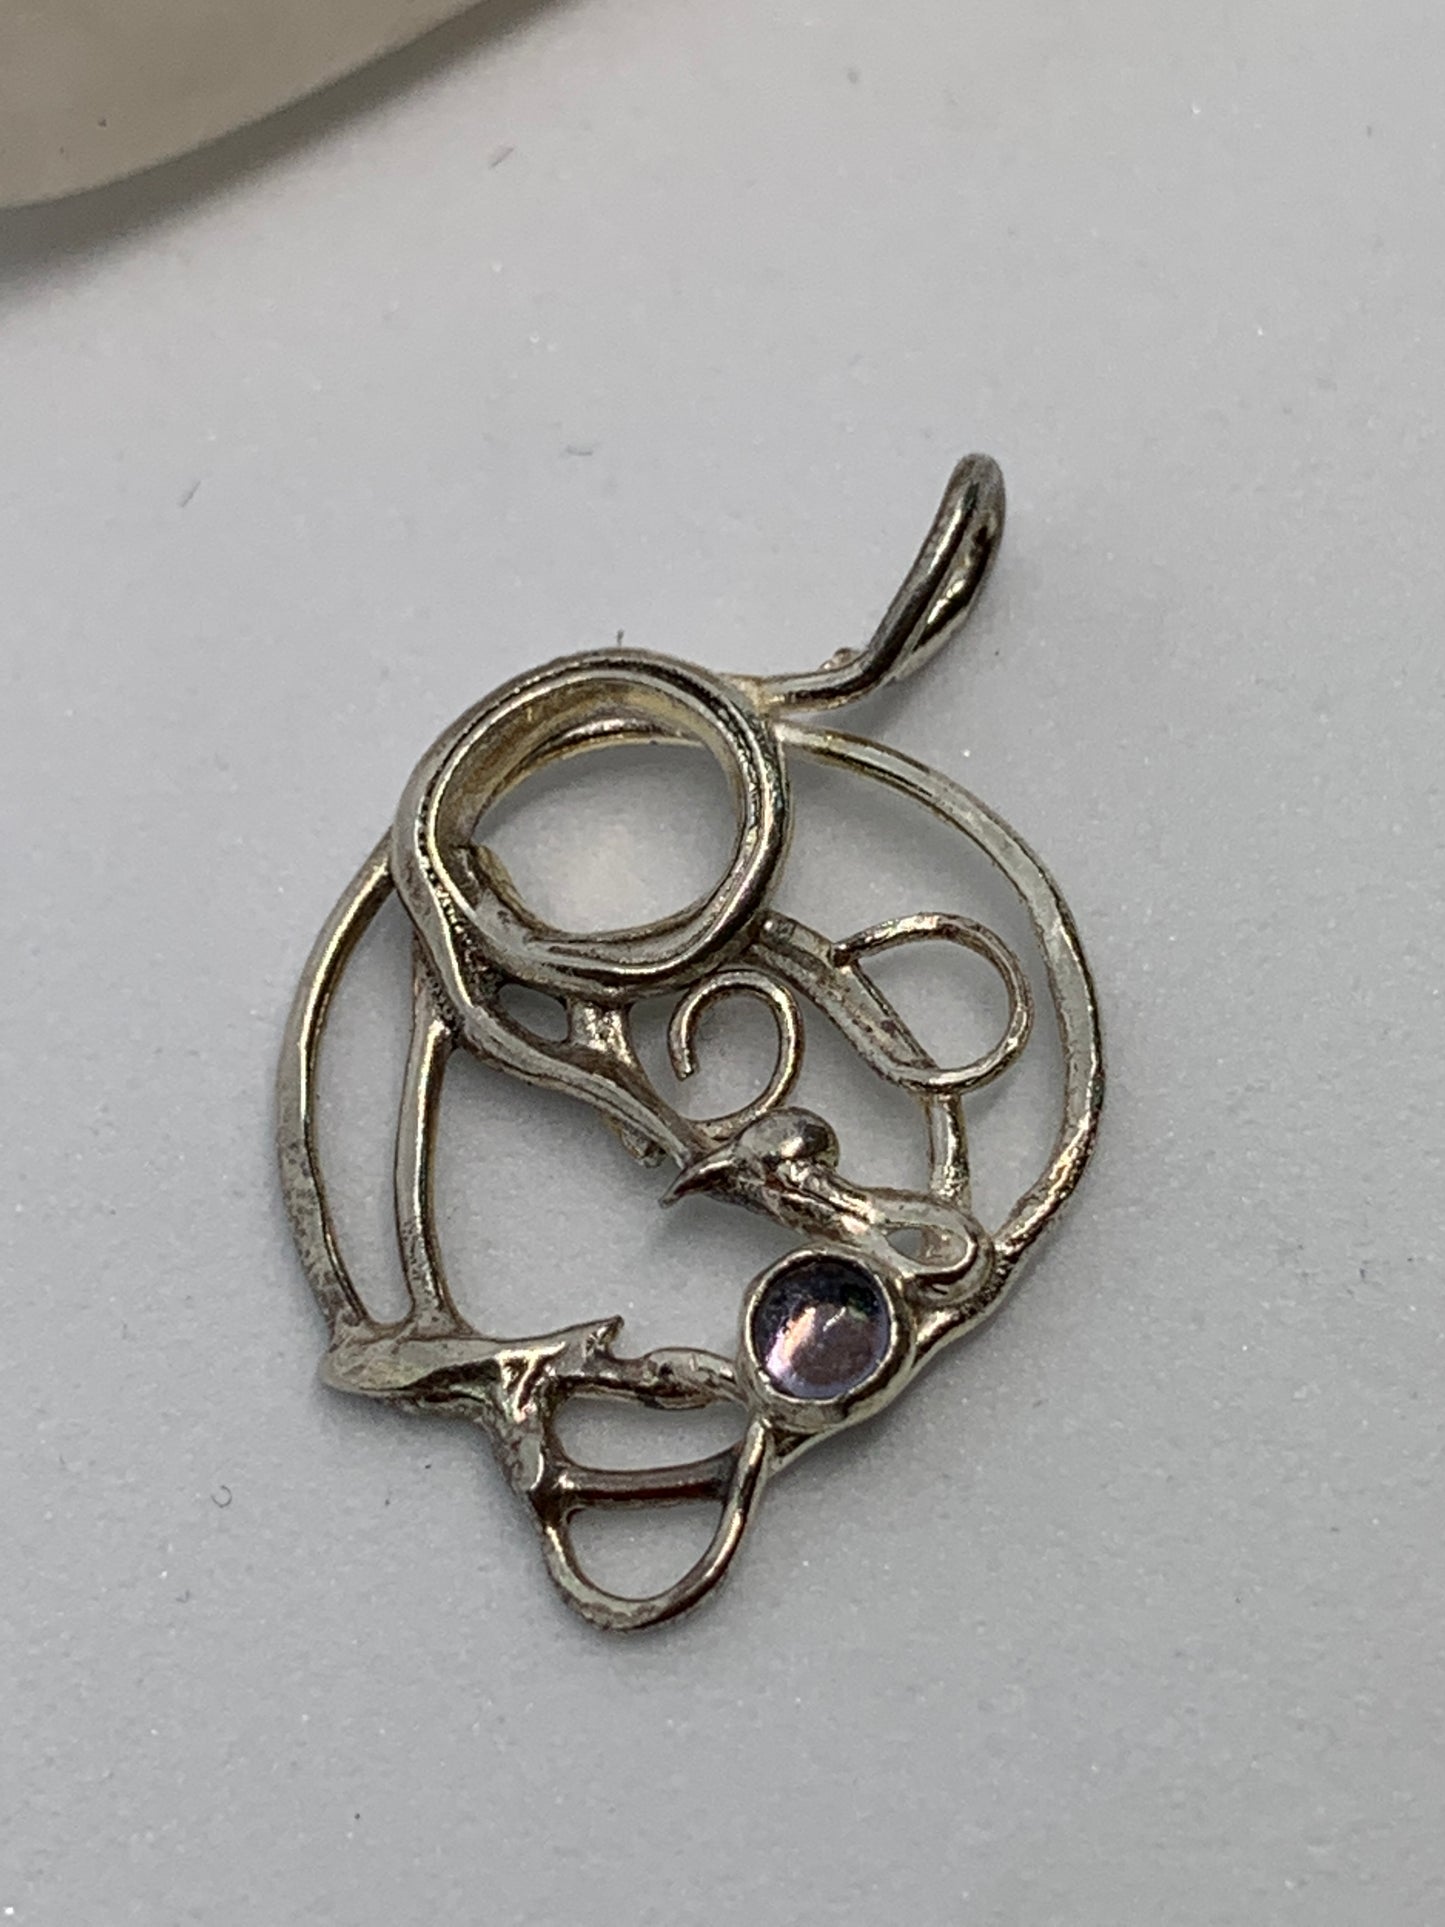 Abstract Geometric Sterling Silver Necklace Pink Tourmaline Stone 